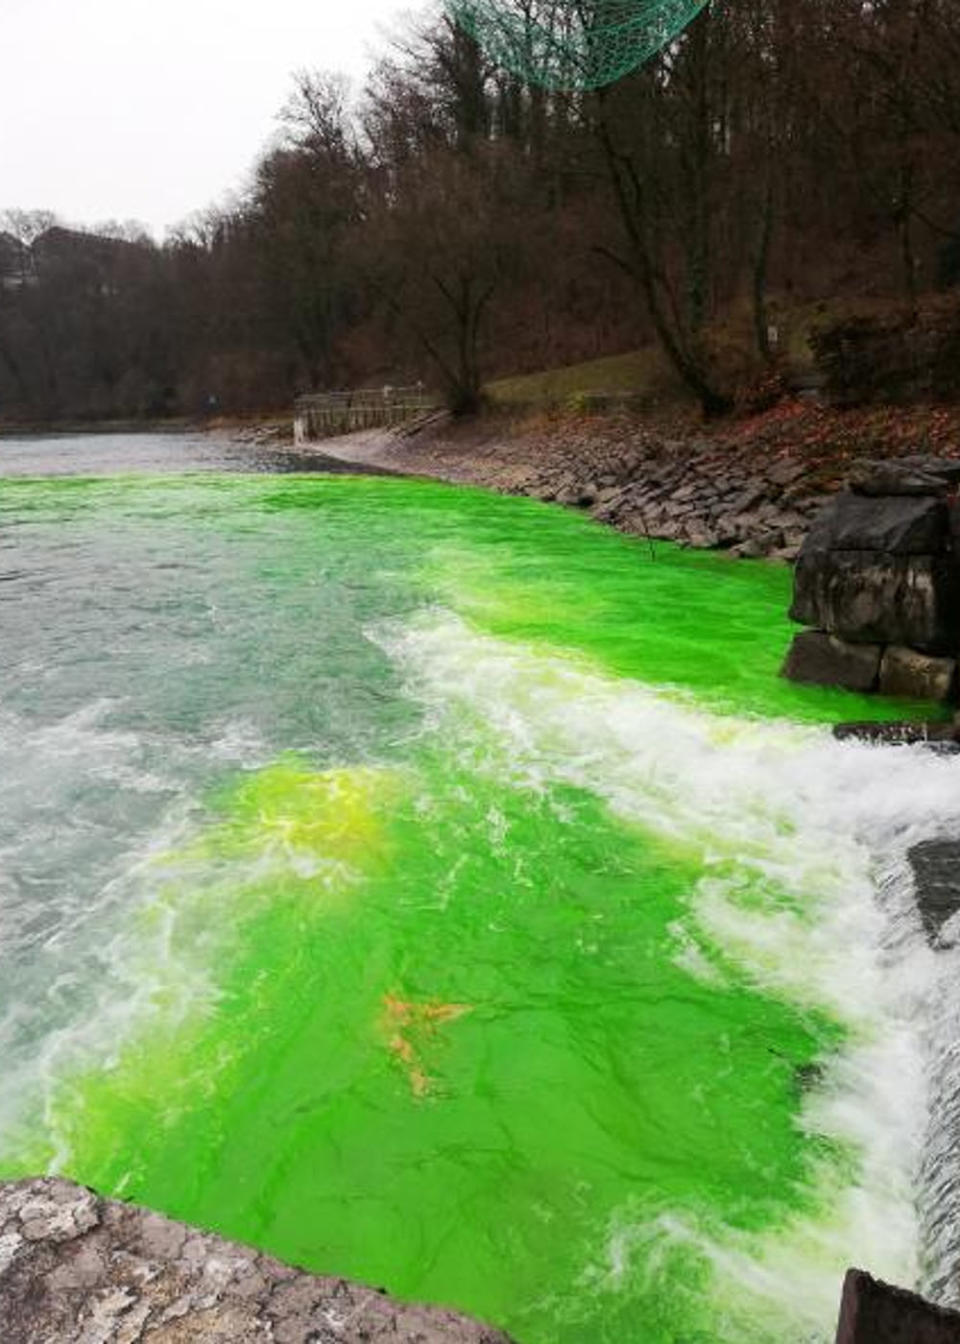 Political activists dyed a Swiss river bright green to highlight the dangers of a nearby ammunitions depot that is being disassembled. Source: CEN/Australscope